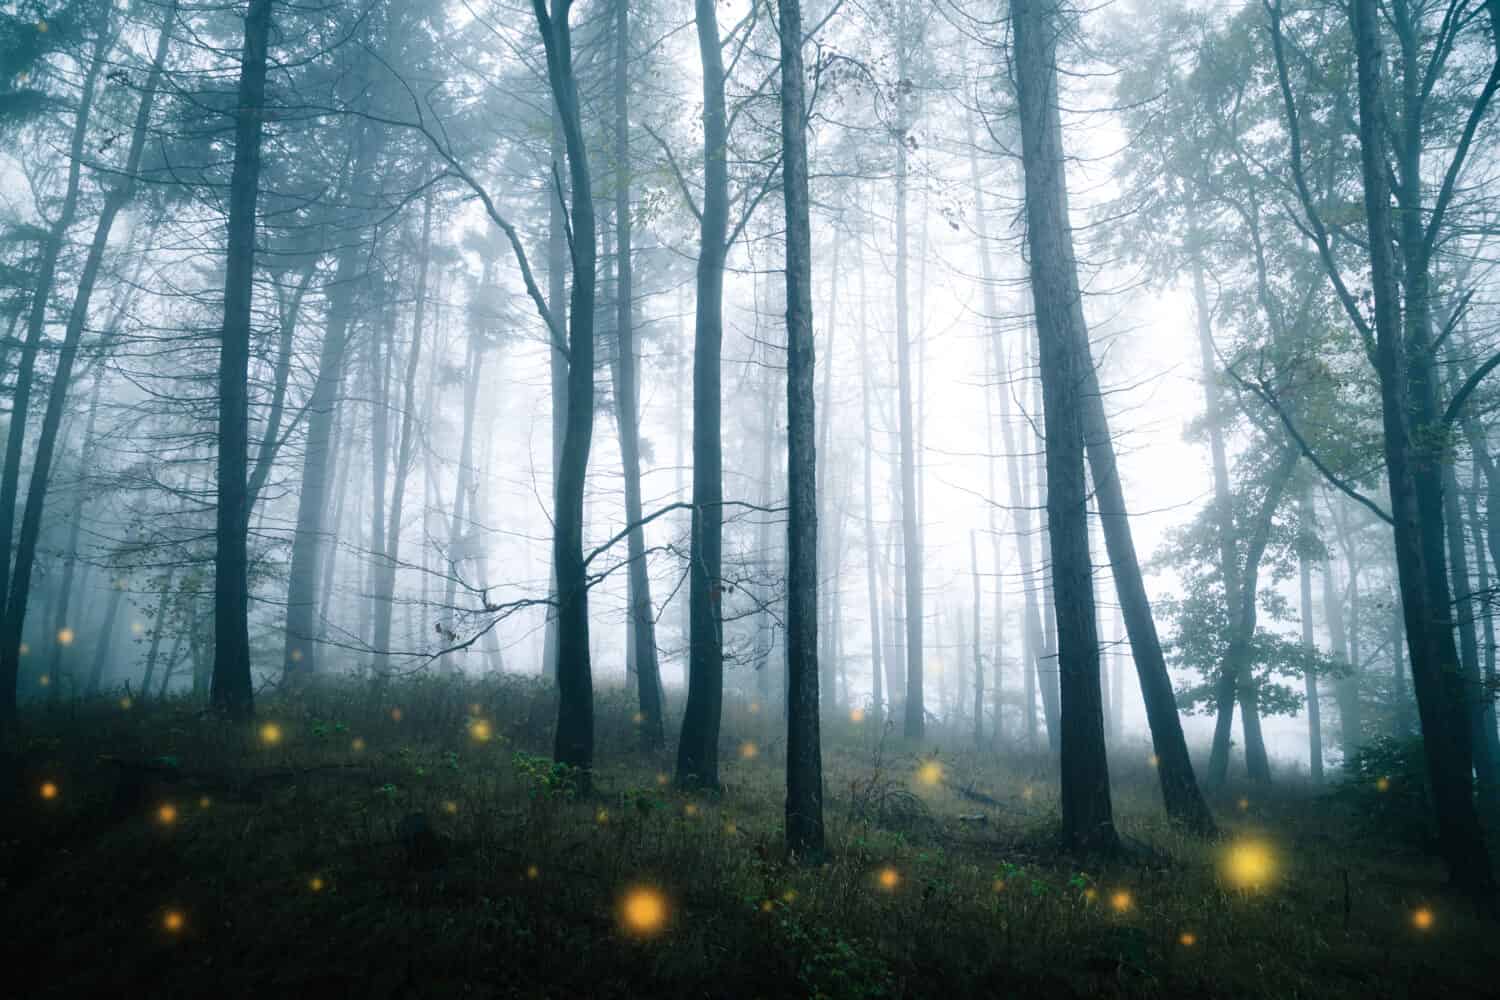 Mystical dark forest with glowing sparks on the forest floor